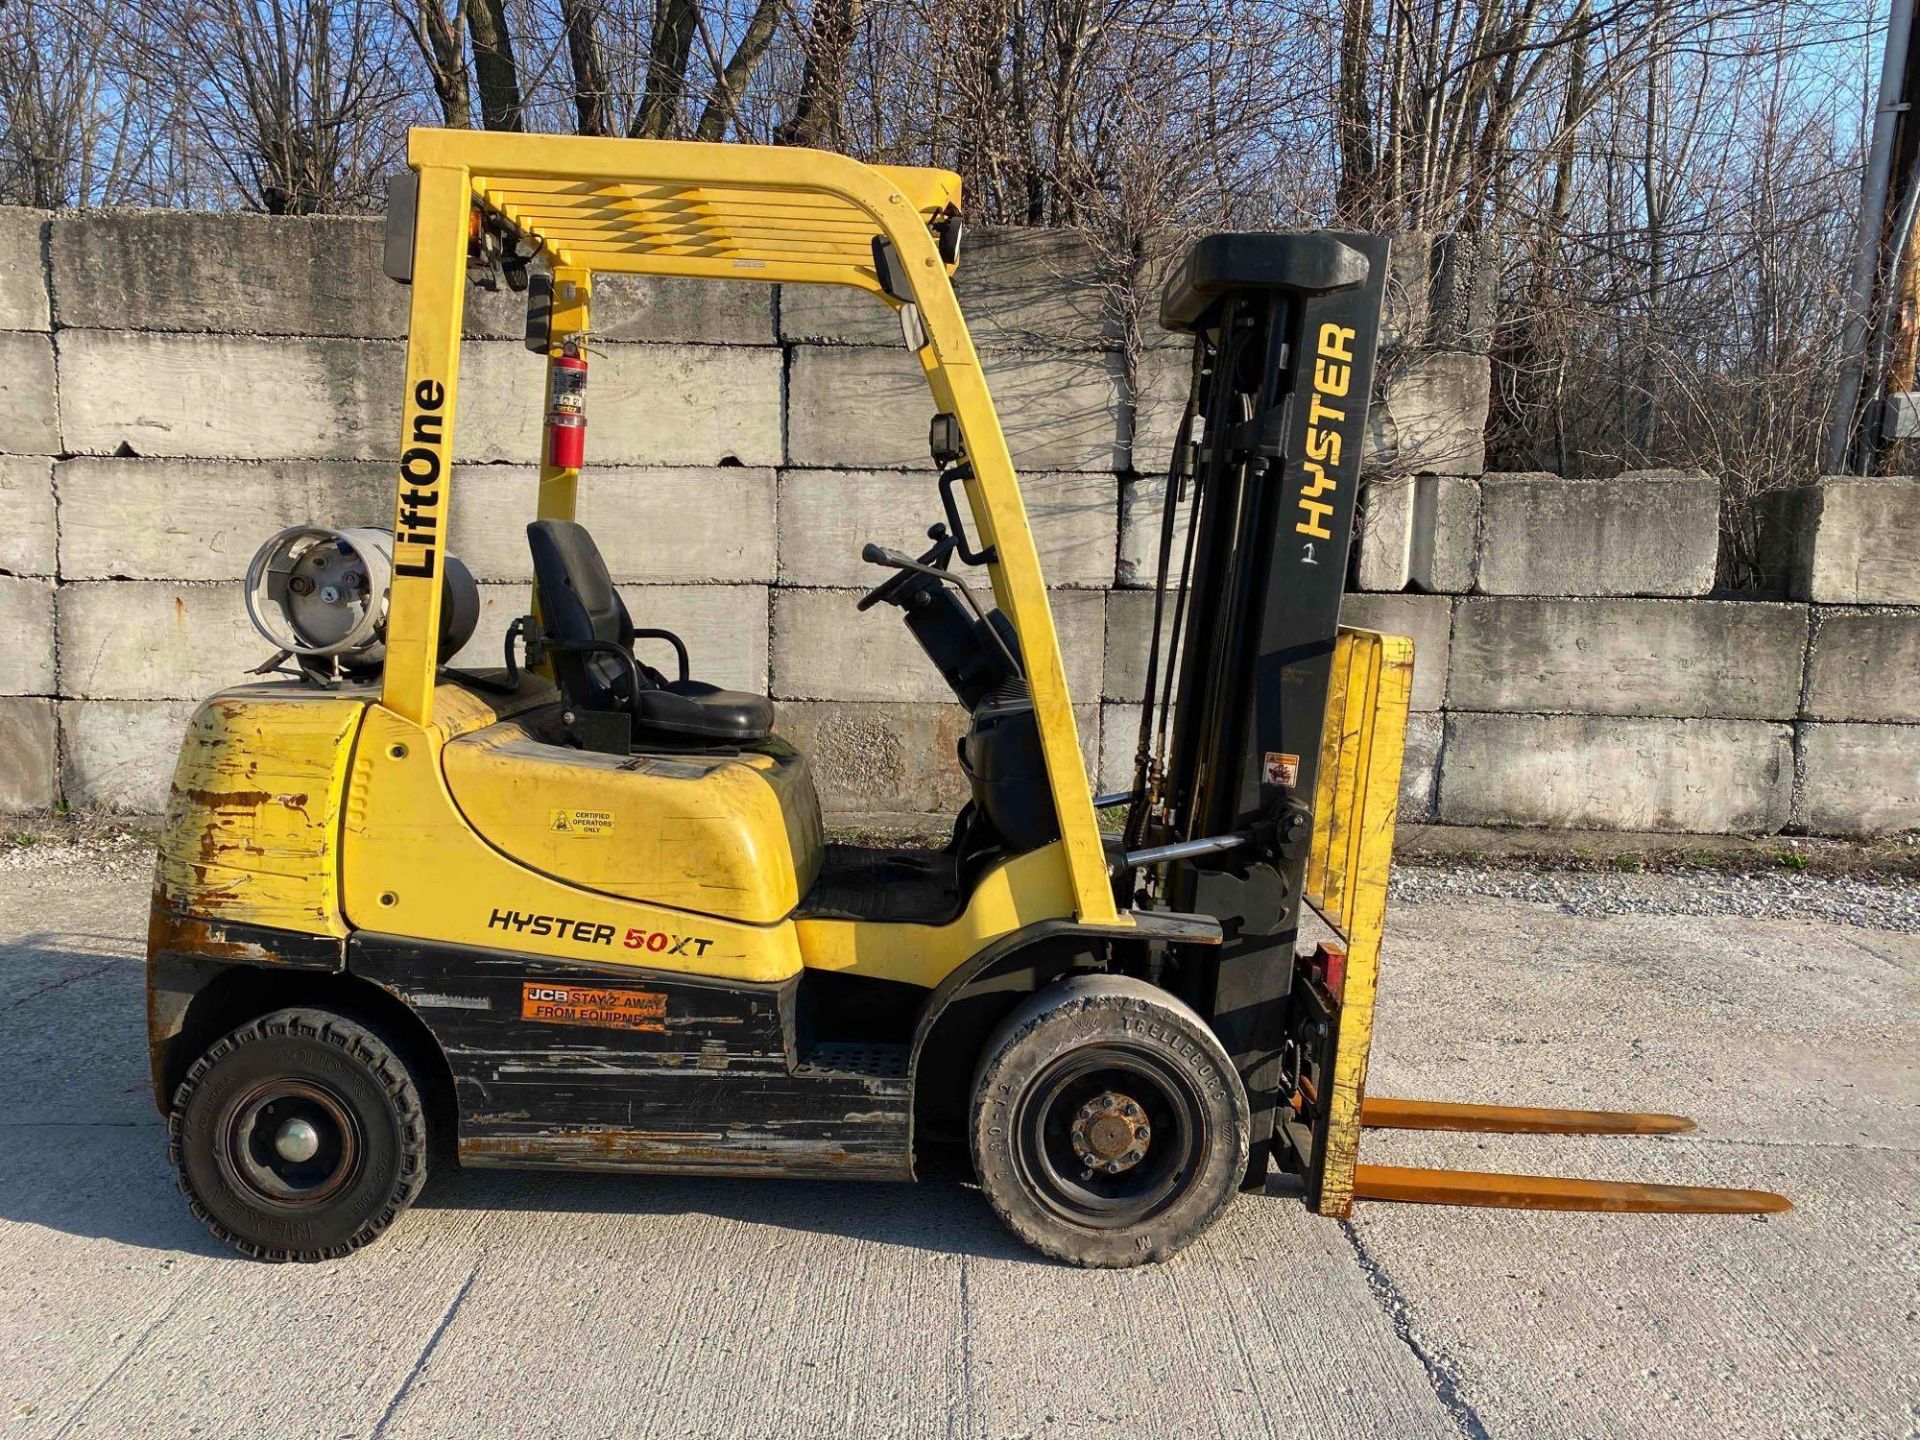 2018 Hyster H50XT 5,000 LB. Forklift, S/N A380V06798S, 195" Lift Height, Solid Cushion Tires, Sidesh